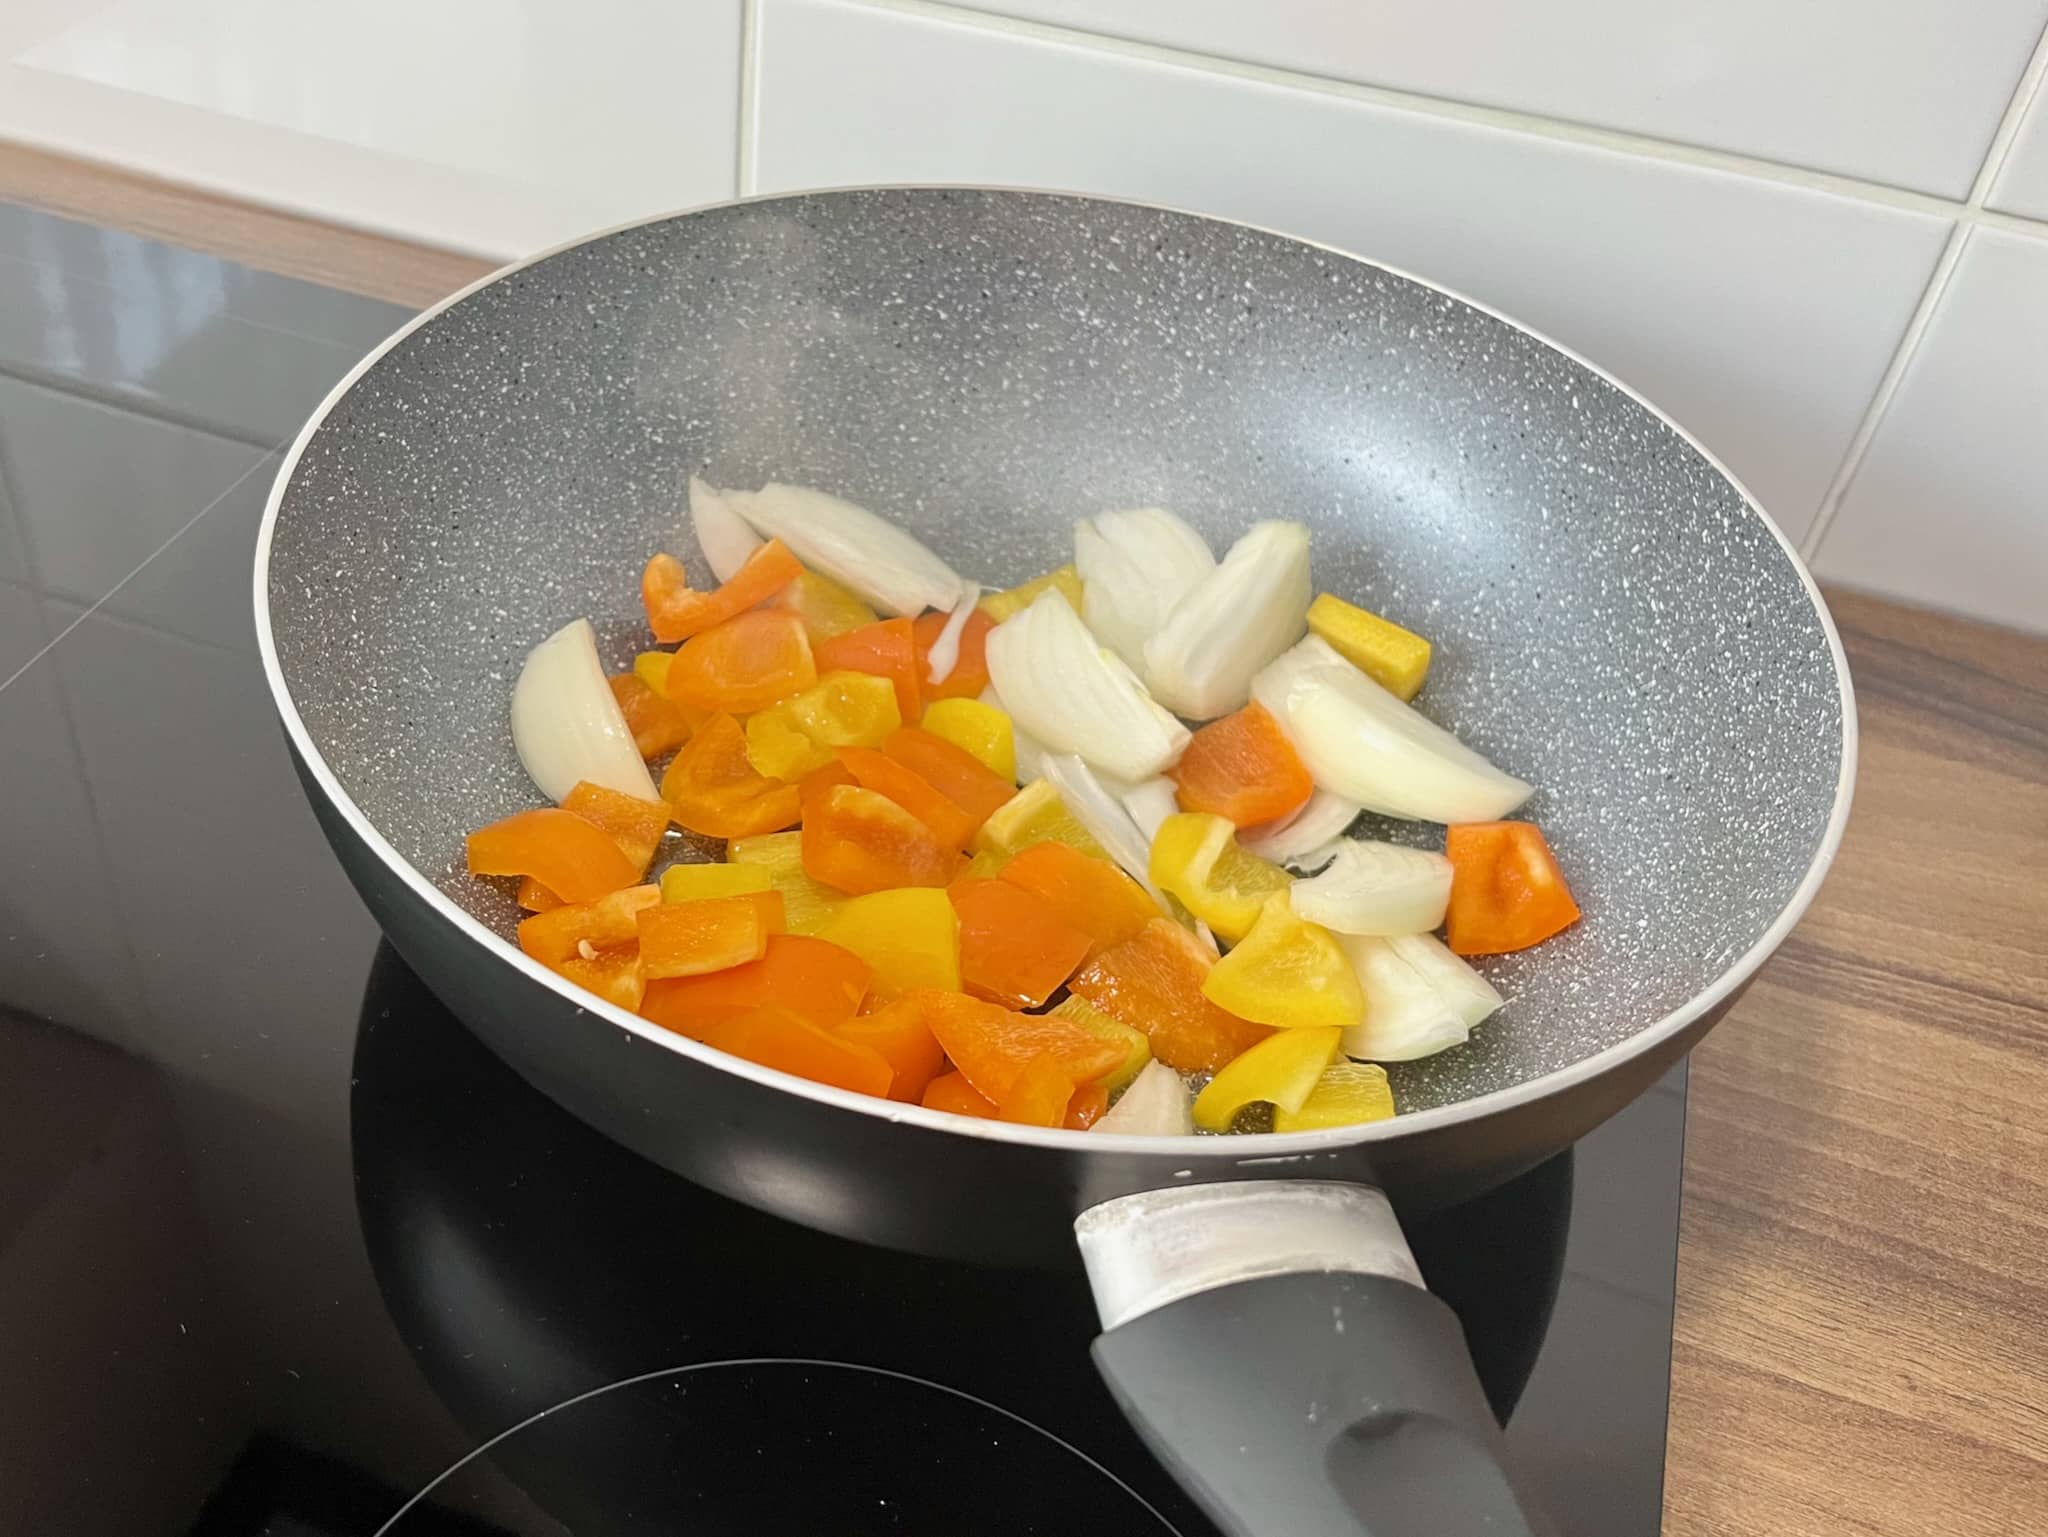 Onion and peppers stir fry in a pan